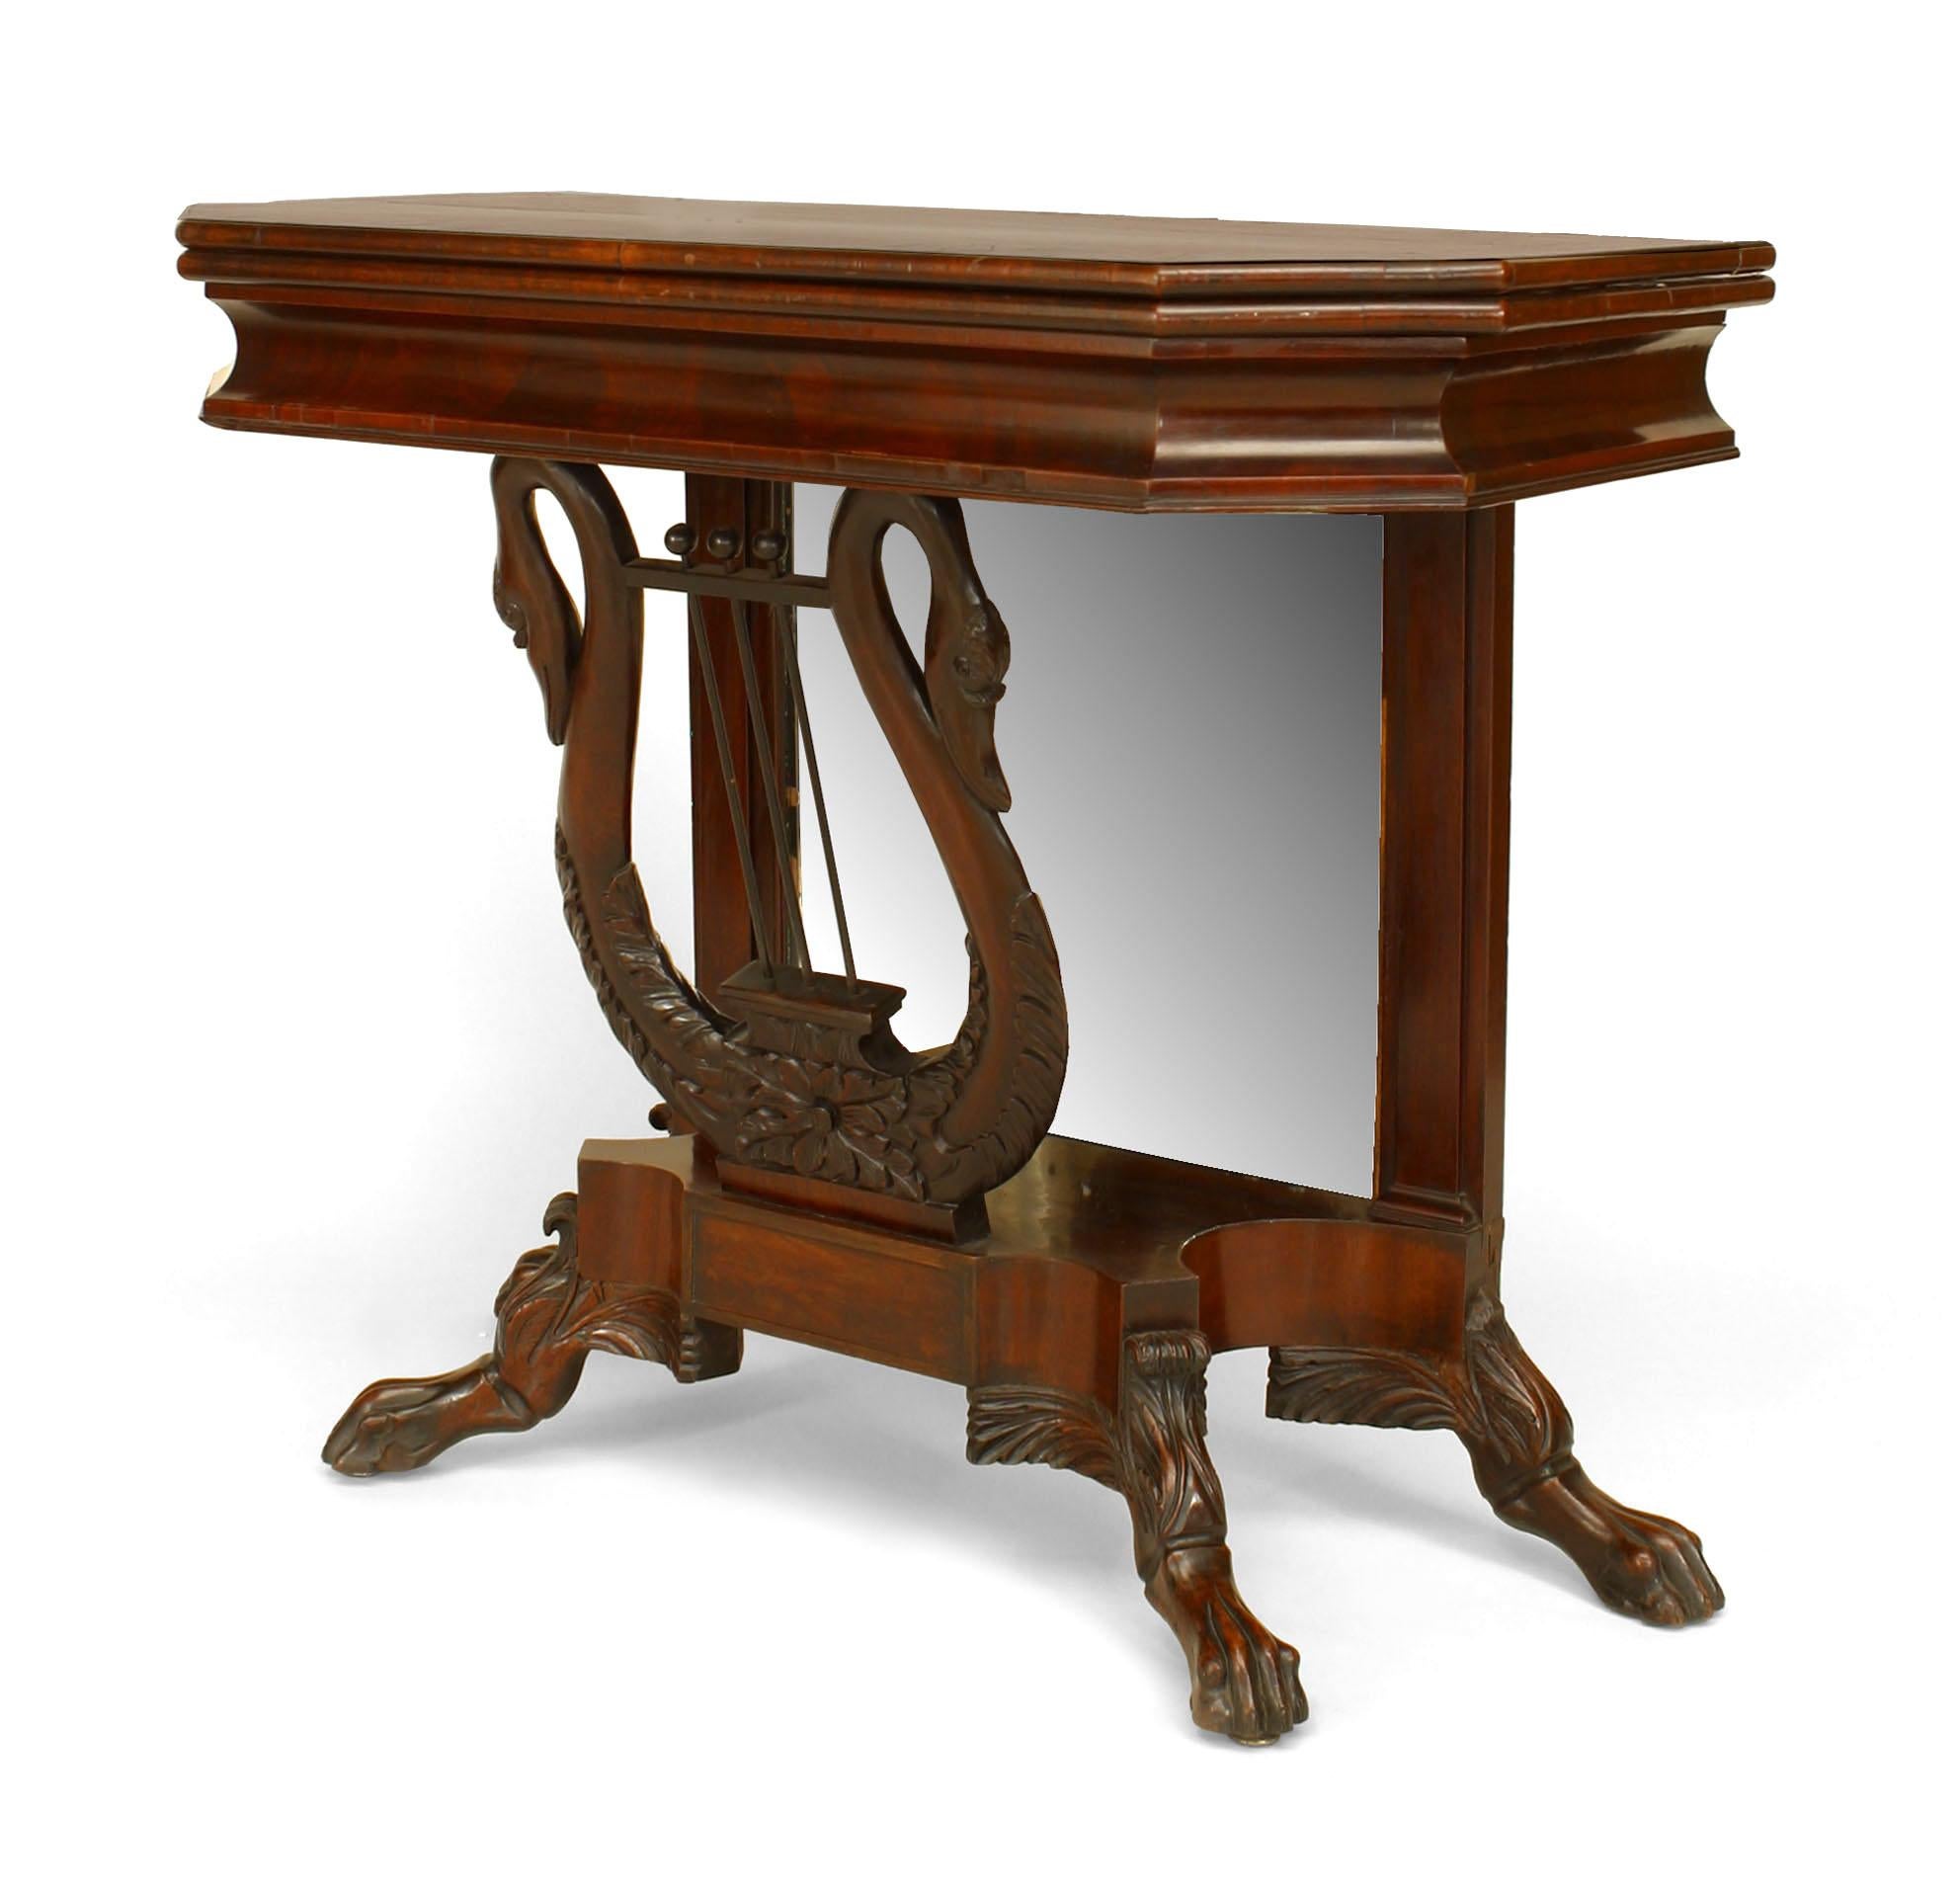 American Empire mahogany flip top console table with mirror back and lyre and swan base.
